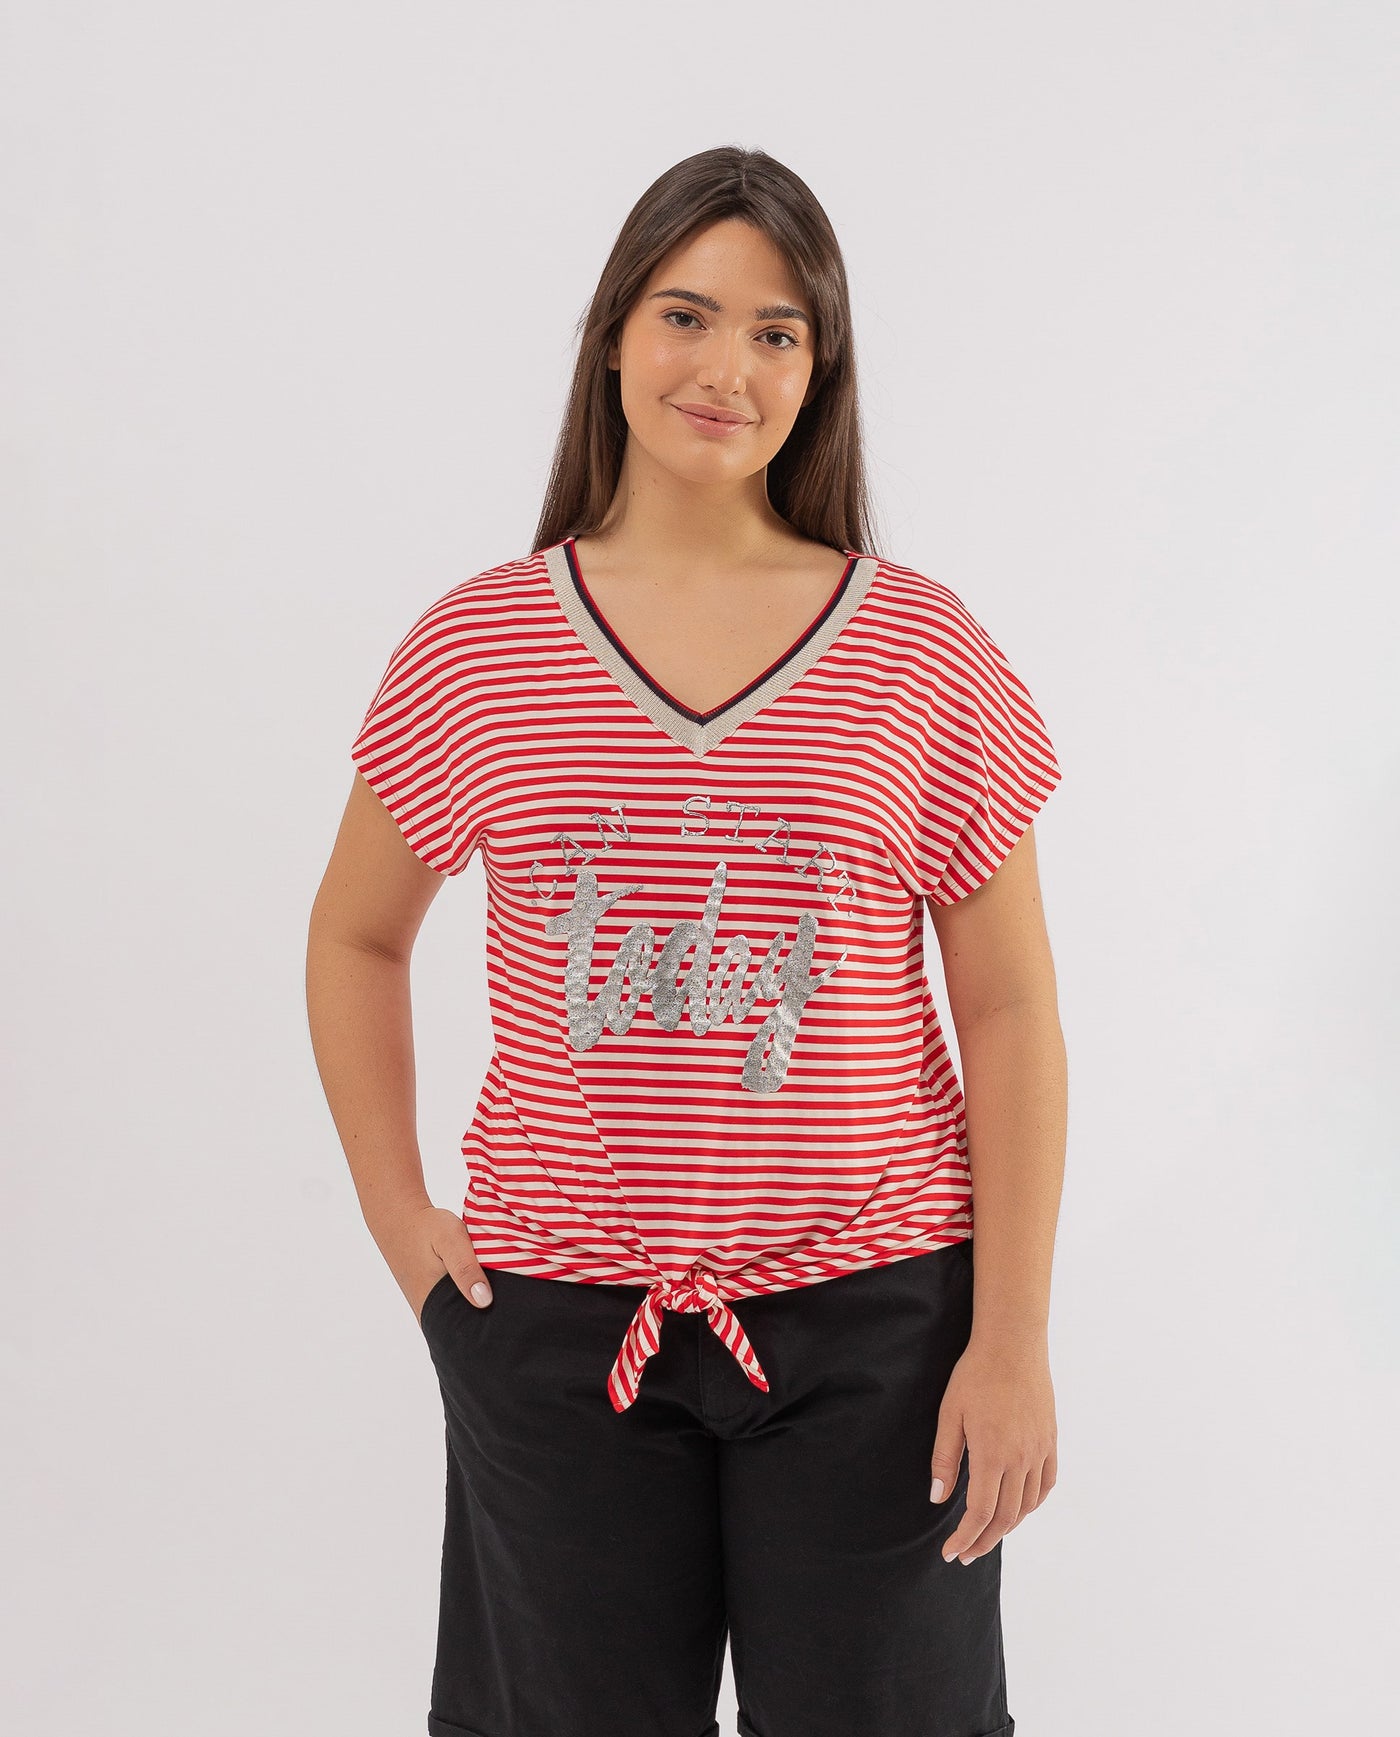 RED STRIPES AND LAMINATED LETTERS T-SHIRT